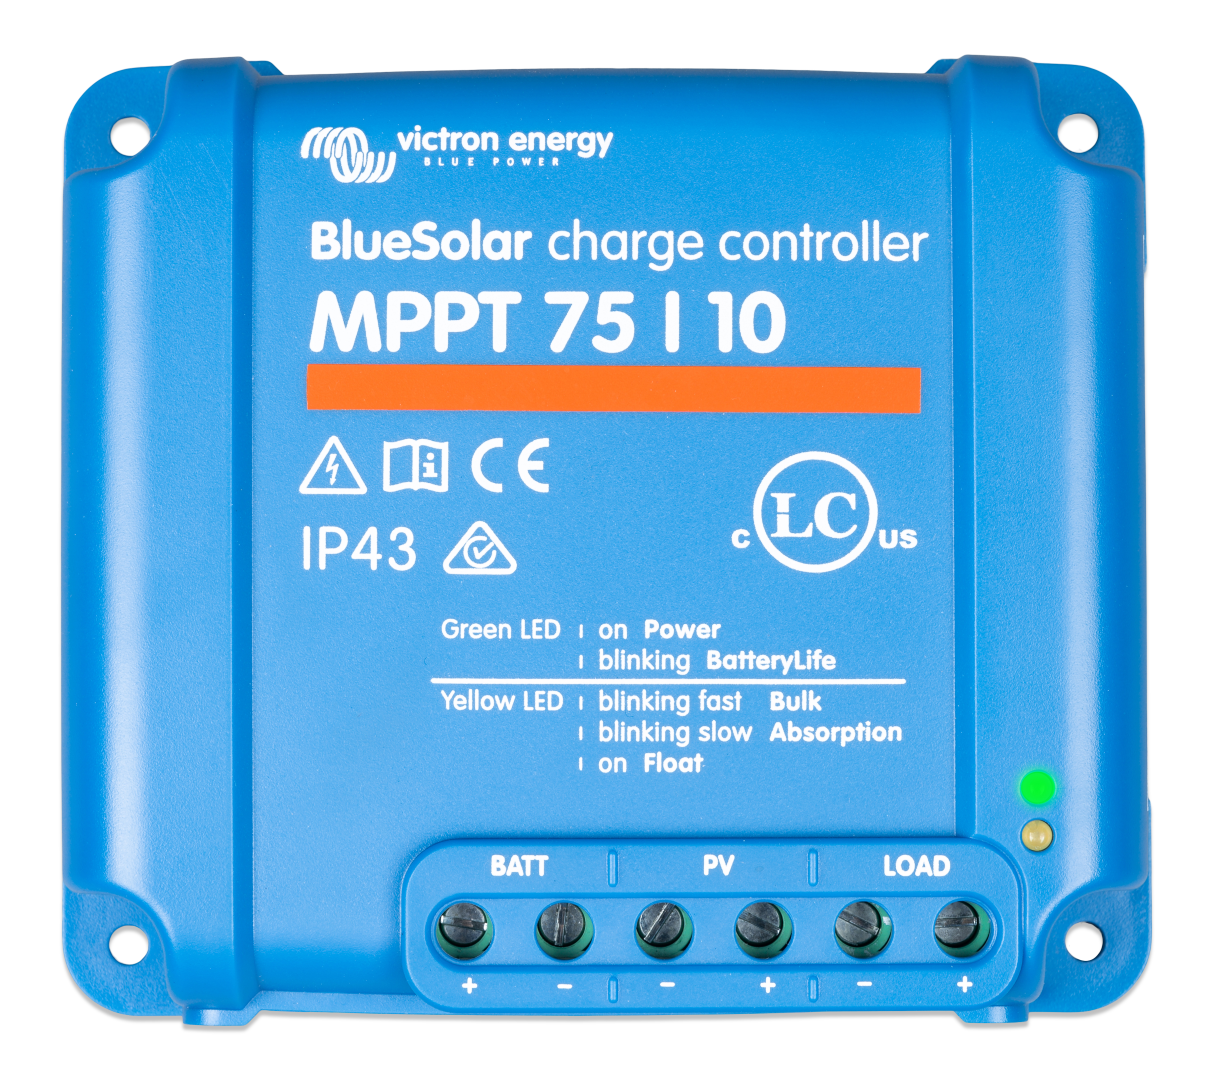 Victron Blue Solar Charge Controller MPPT 75/10, 75/15,100/15 & 100/20